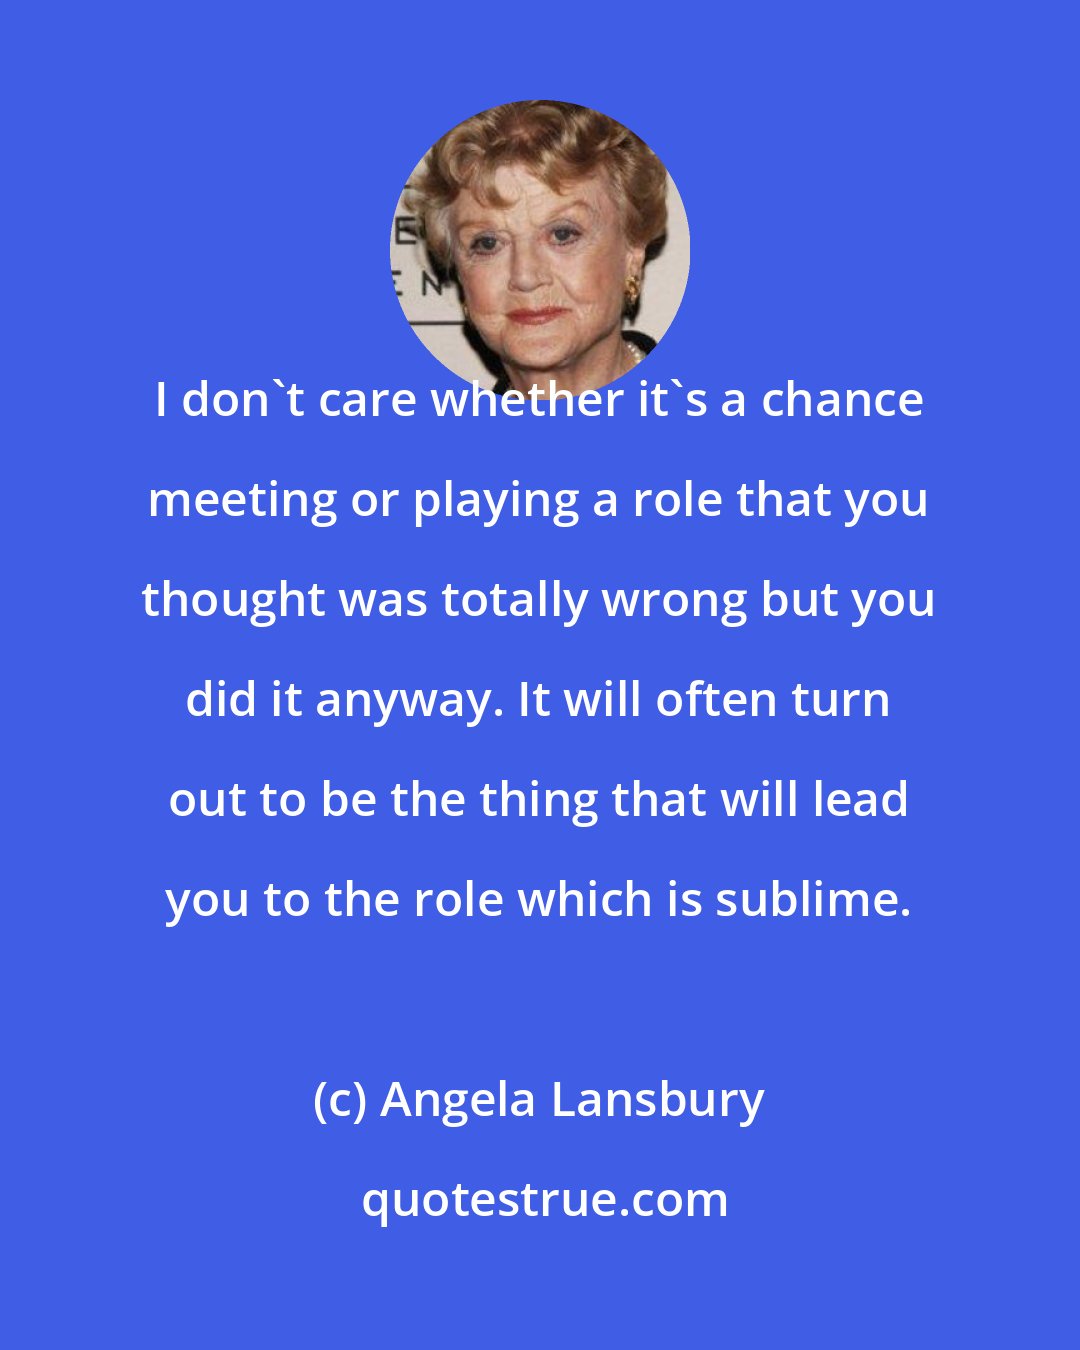 Angela Lansbury: I don't care whether it's a chance meeting or playing a role that you thought was totally wrong but you did it anyway. It will often turn out to be the thing that will lead you to the role which is sublime.